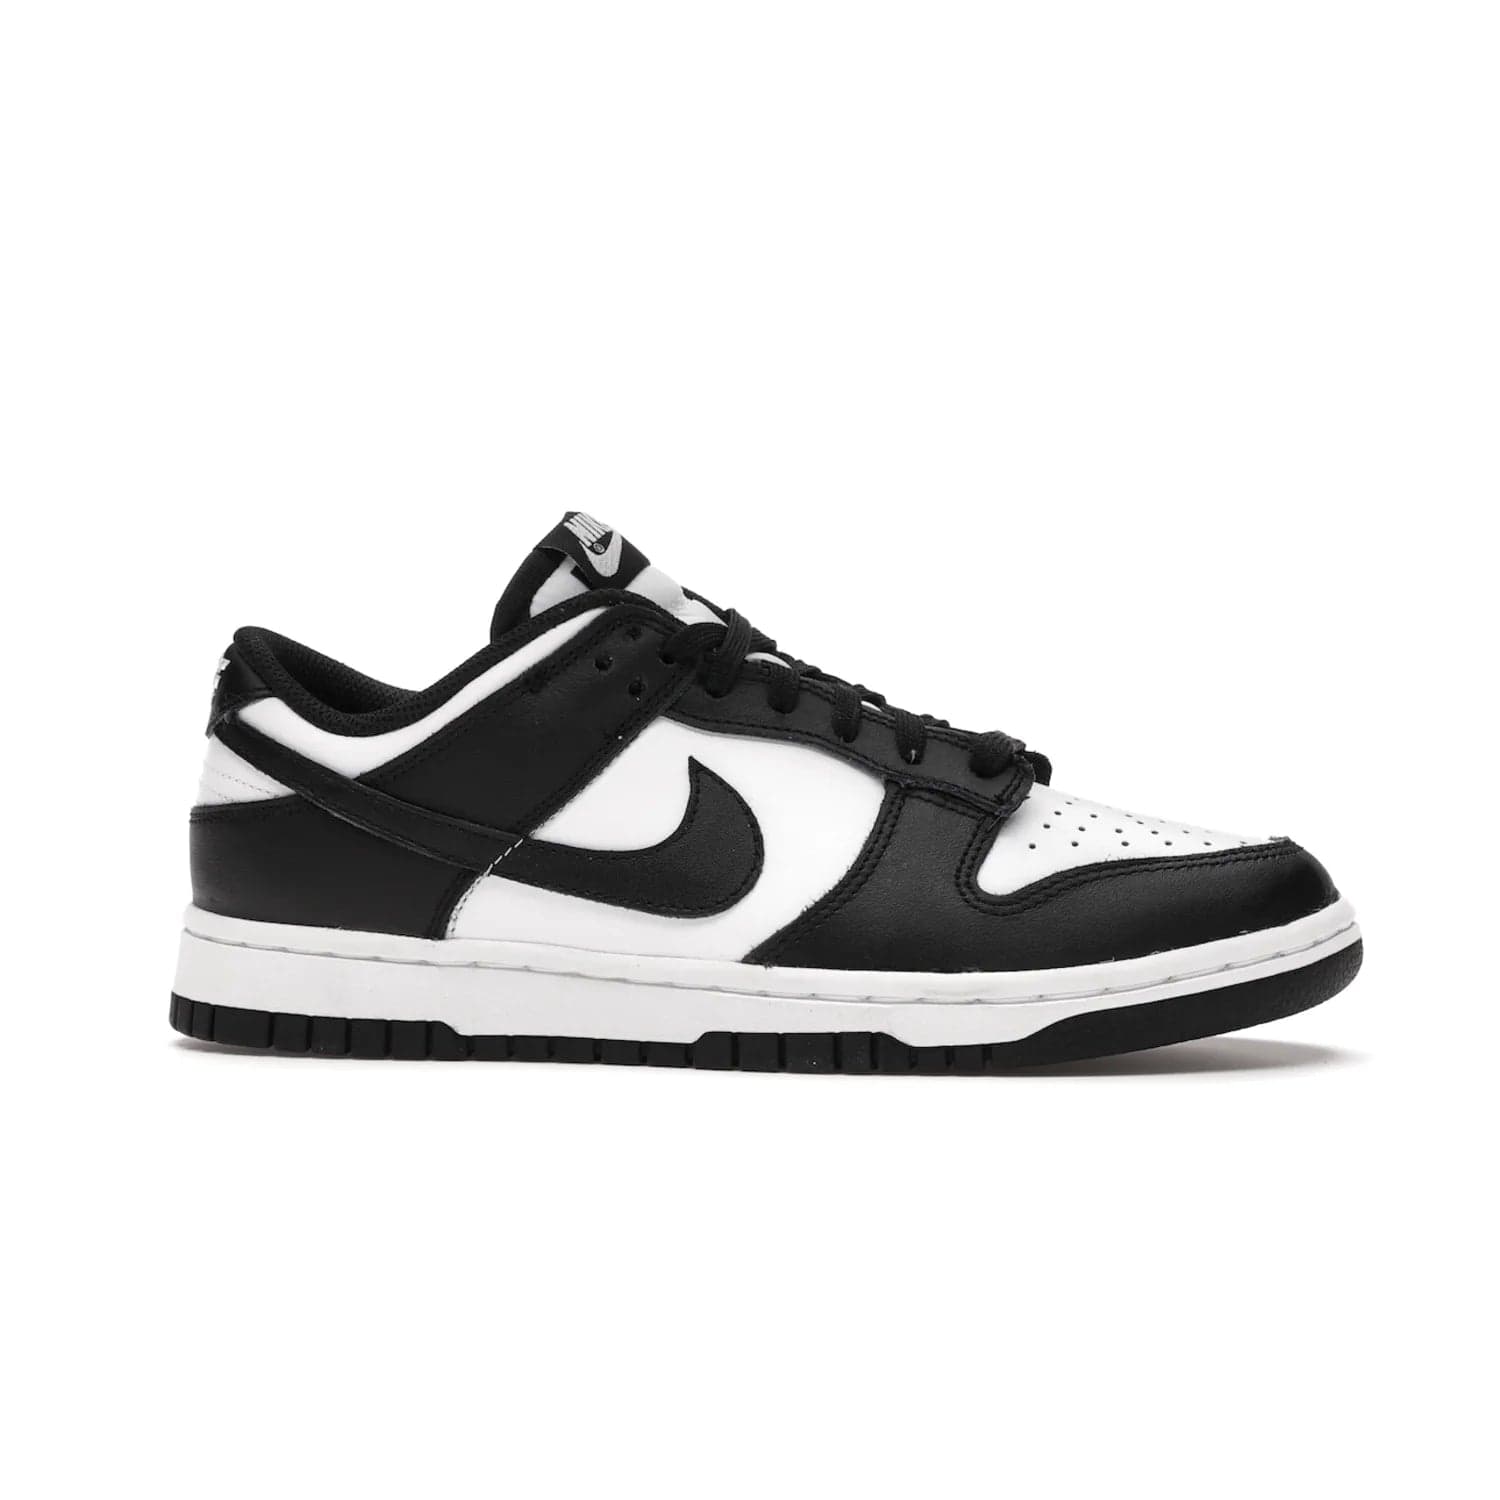 Nike Dunk Low Retro White Black Panda (2021) (Women's) - Image 2 - Only at www.BallersClubKickz.com - Say hello to the new Nike Dunk Low Retro White Black Panda (2021) (Women's)! White & black leather upper with Nike Swoosh logo. Get your pair for $100 in March 2021! Shop now!